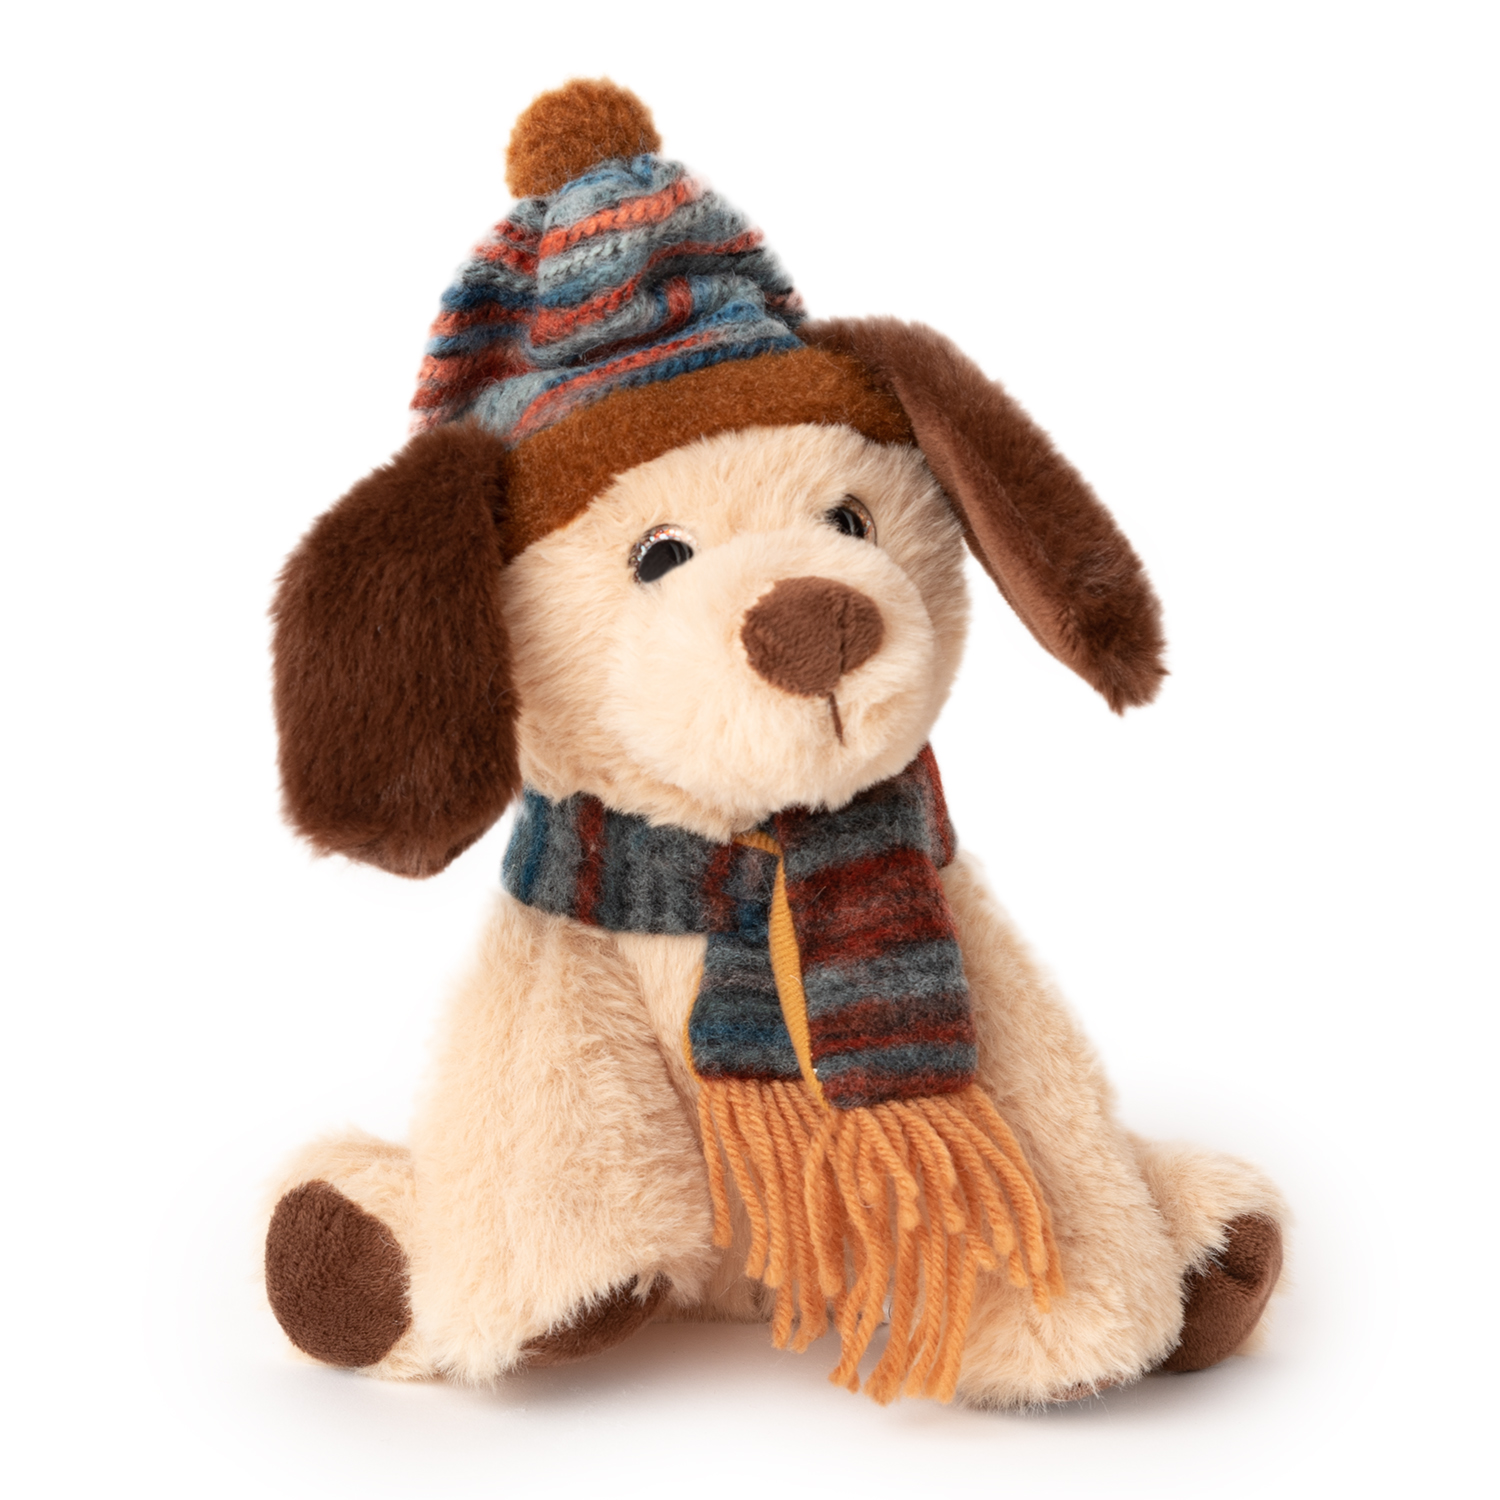 Dog with hat and scarf